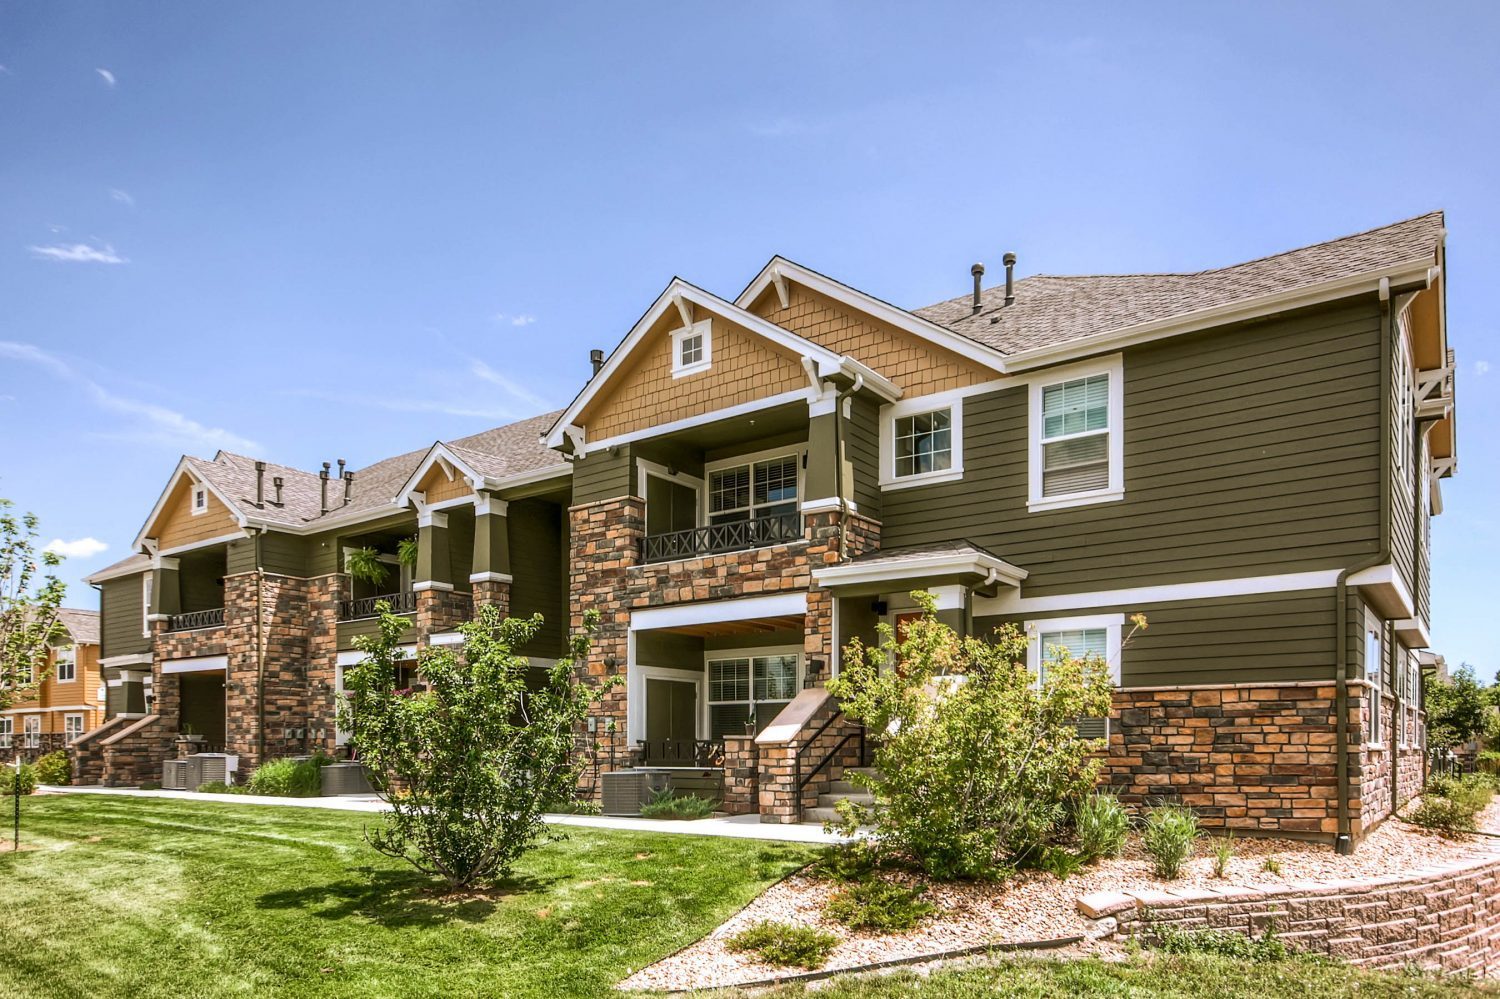 Inland Private Sells Two Denver Multifamily Properties in Latest Full-Cycle Transaction